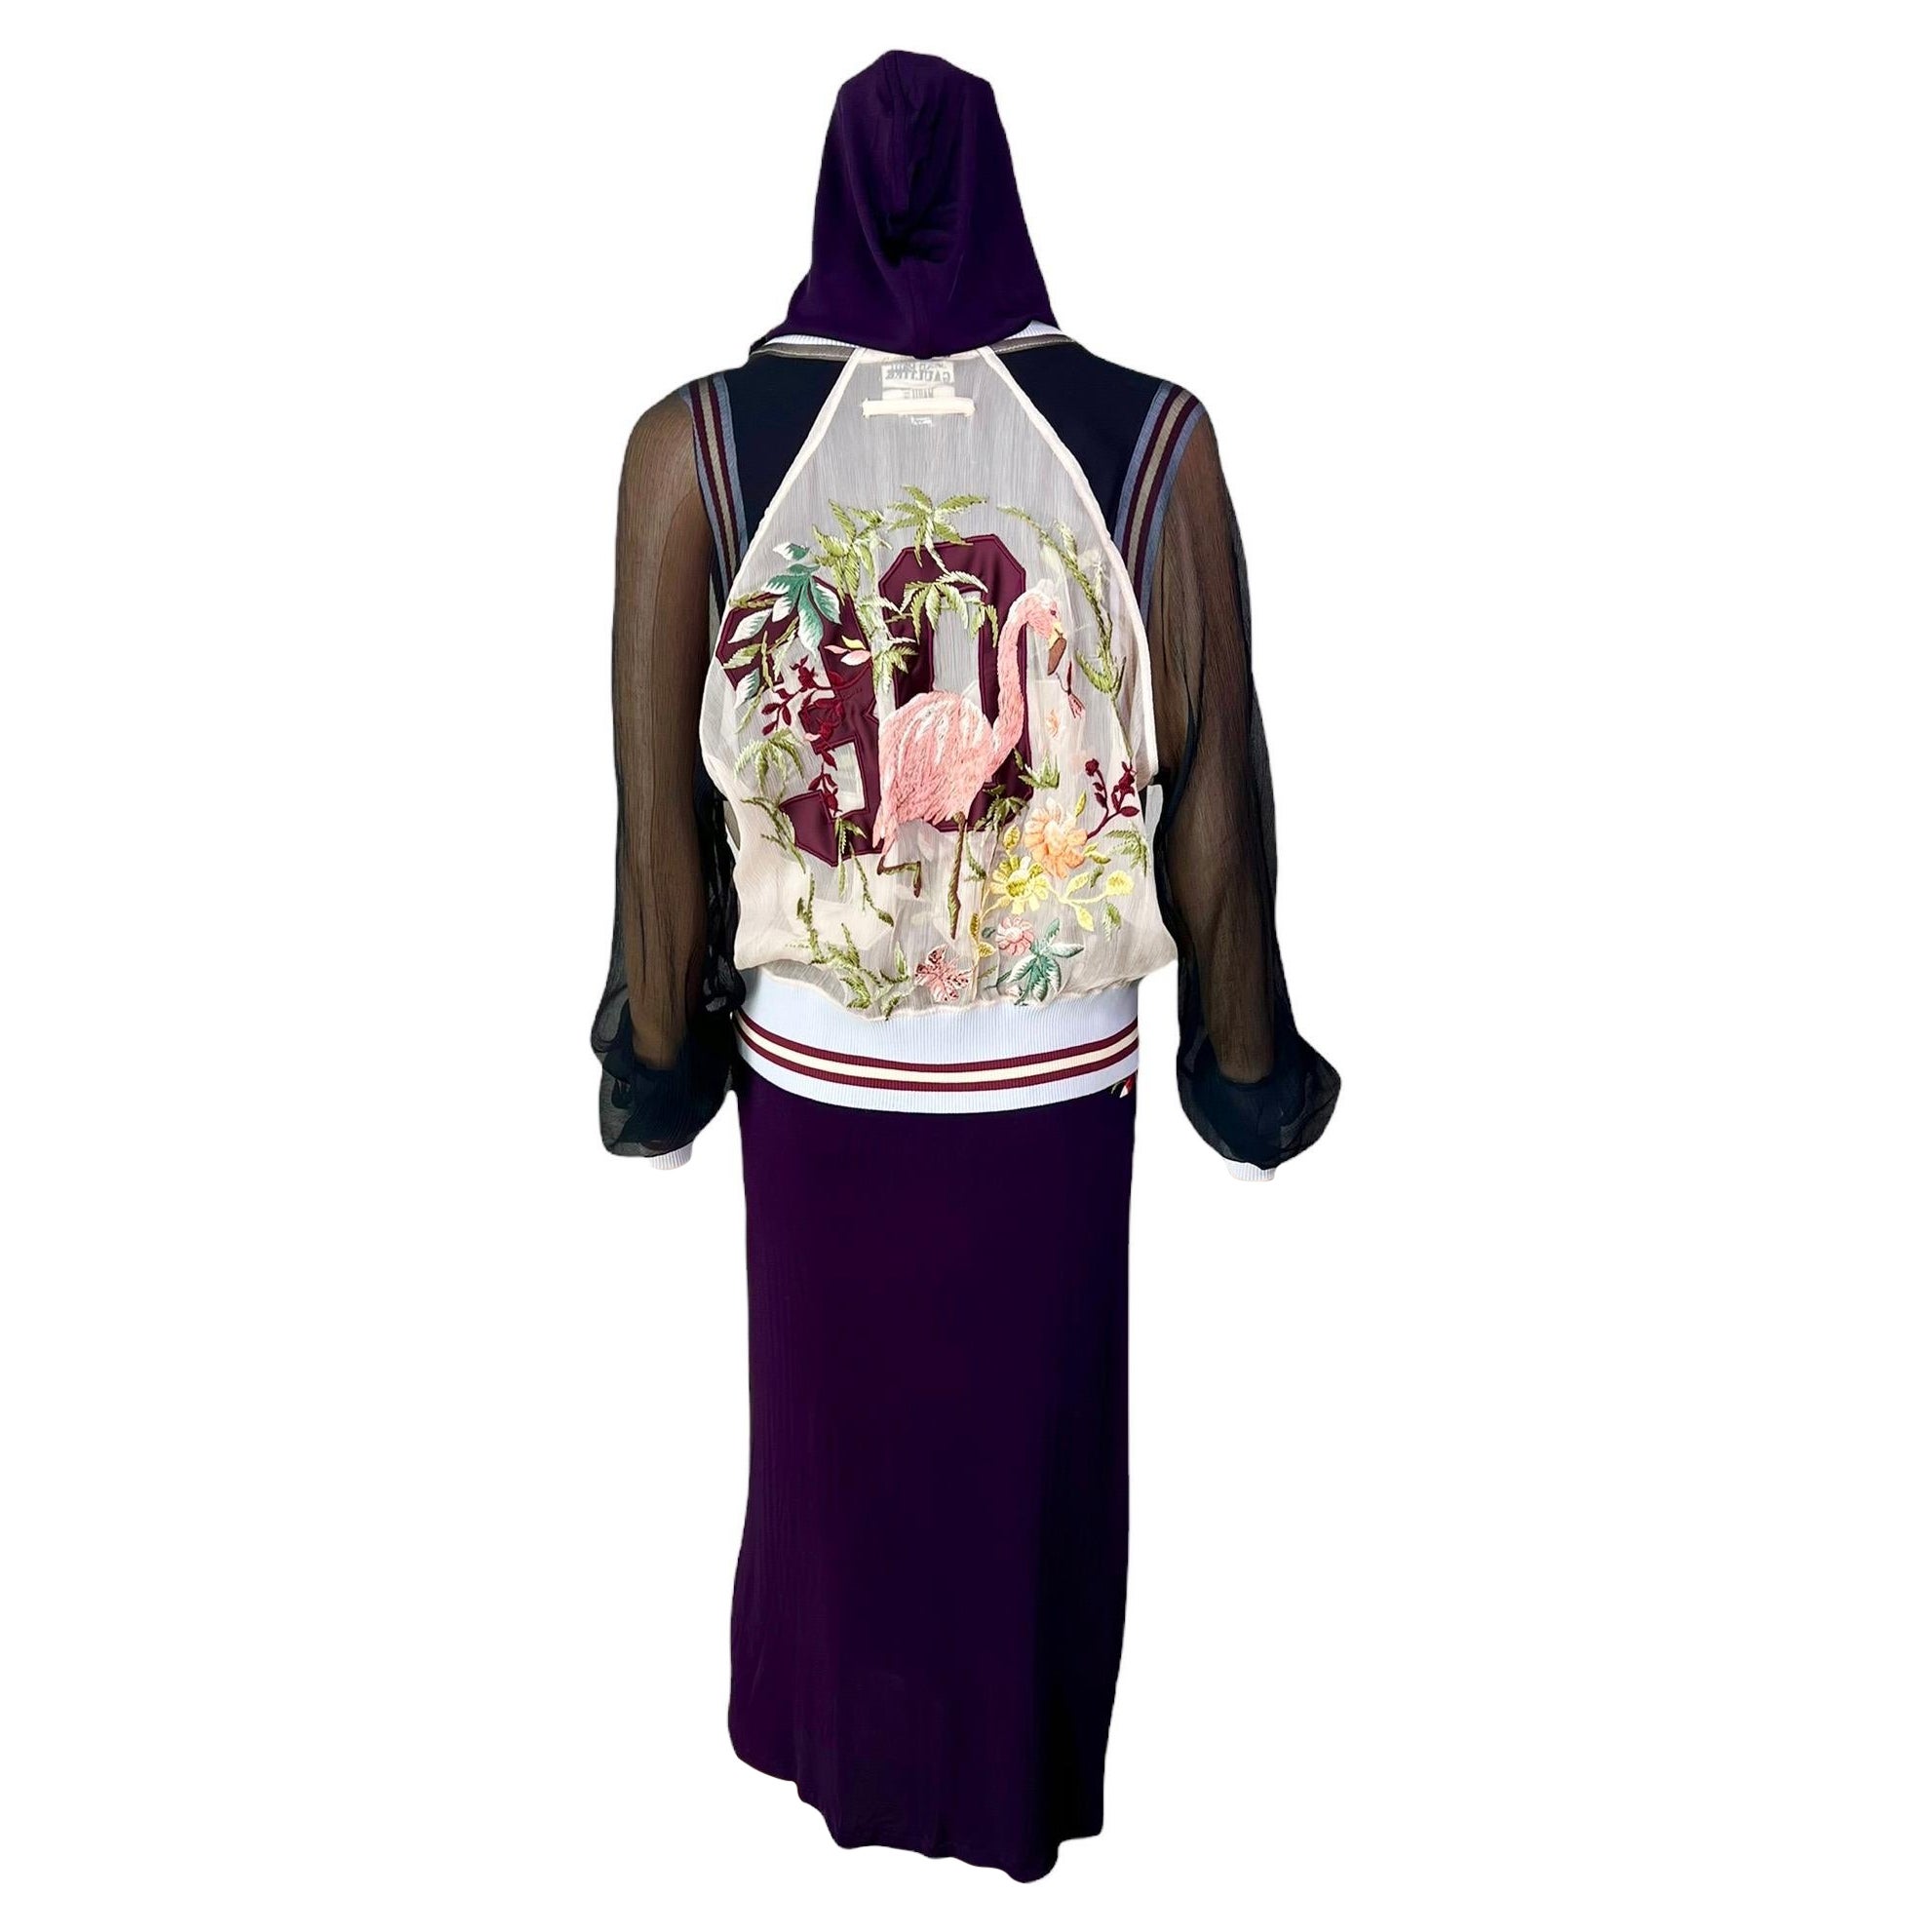 Jean Paul Gaultier S/S 2007 Embroidered Sheer Hooded Jacket & Dress 2 Piece Set  For Sale